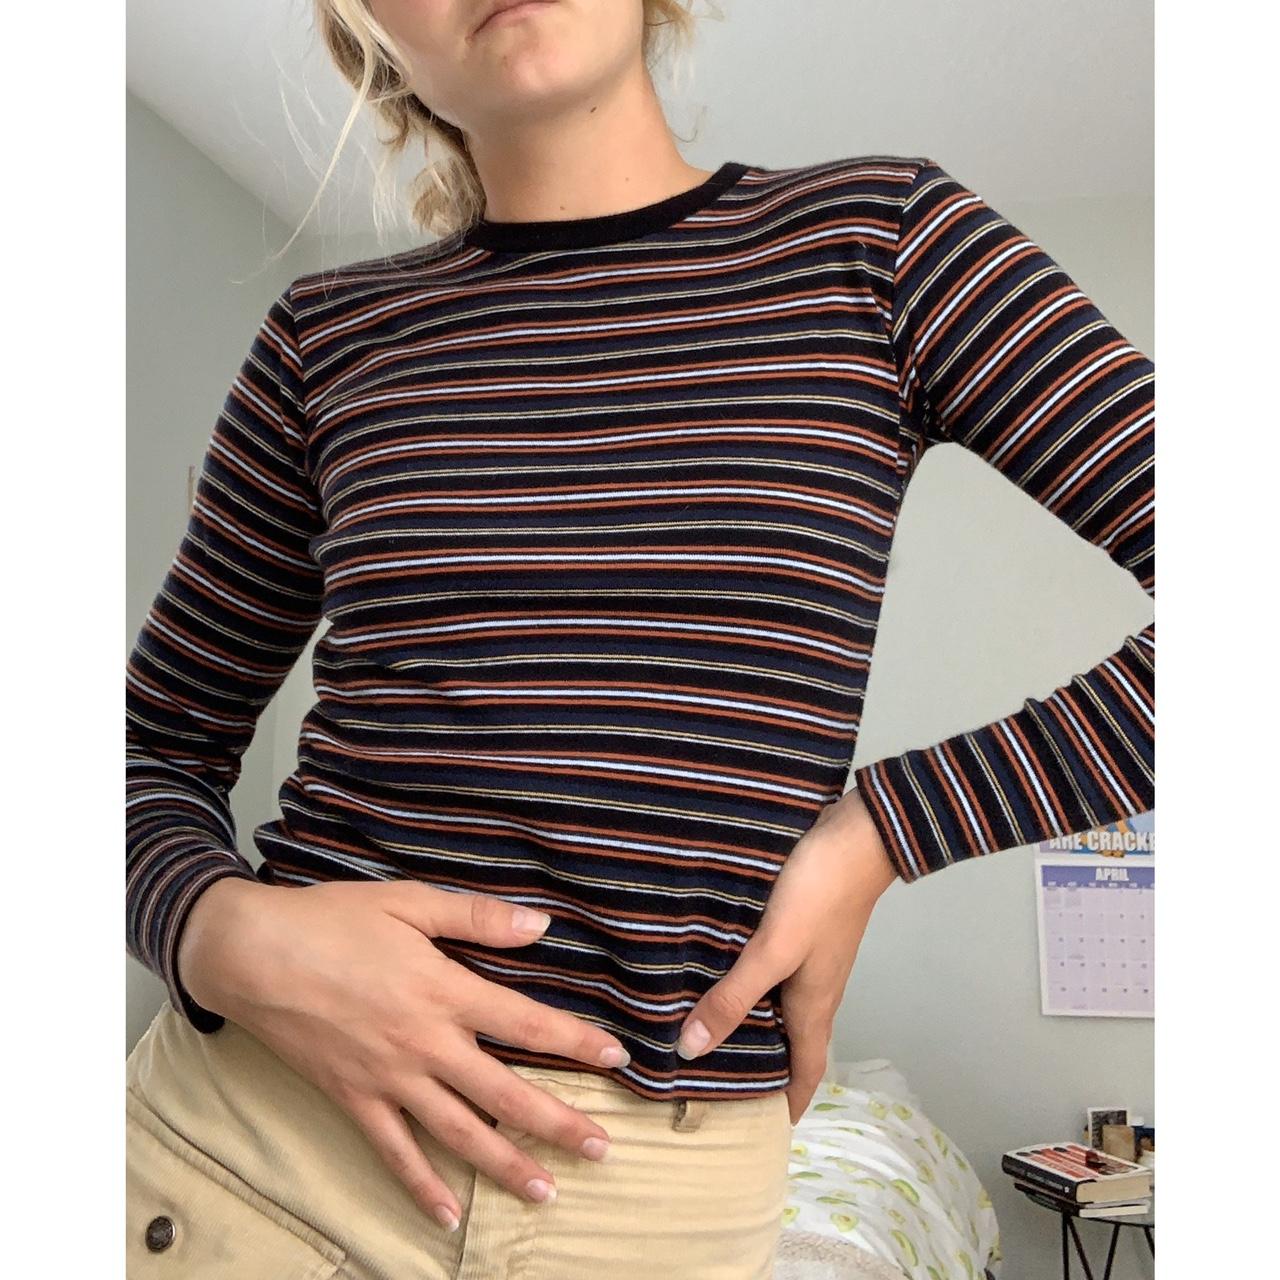 BRANDY MELVILLE STRIPED LONG SLEEVE 💡🎹 from last